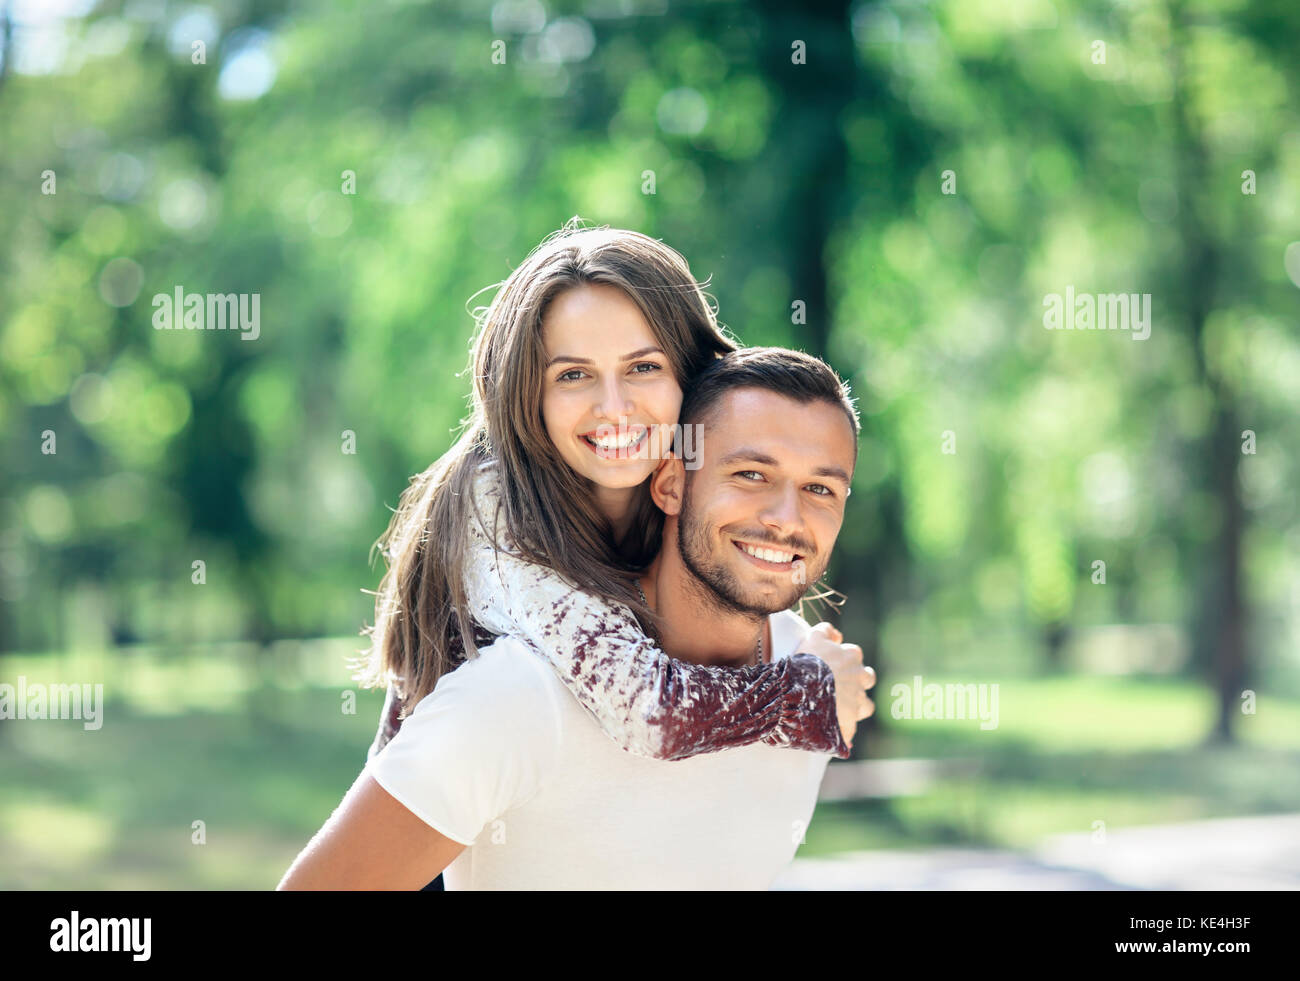 Outdoors portrait of lovers happy young man and woman looking at camera. Smiling girl piggyback of her boyfriend. Love, youth, relationship concept ph Stock Photo